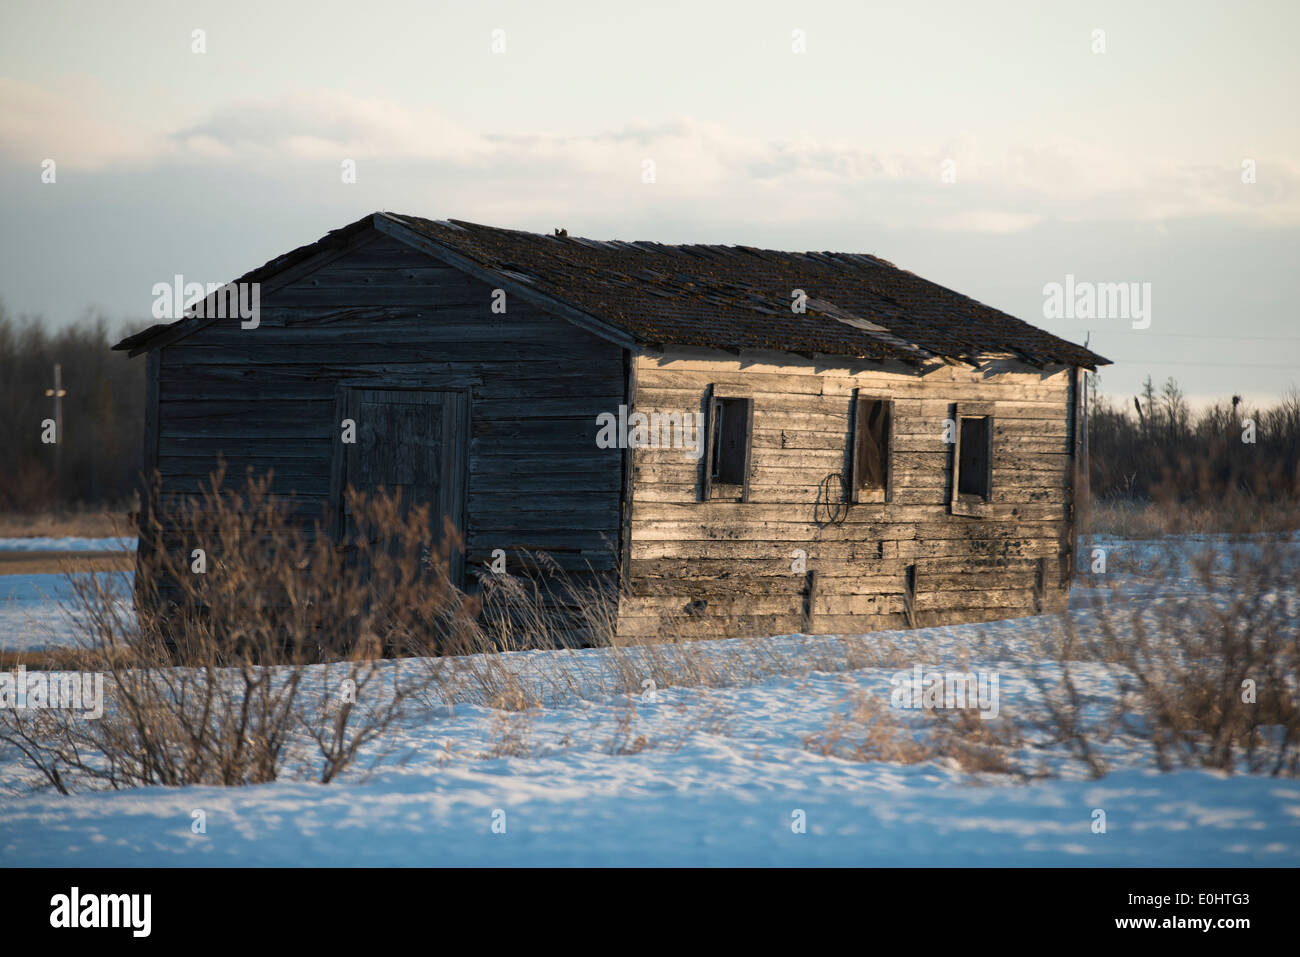 Log Cabin In Snow Covered Field At Hecla Grindstone Provincial